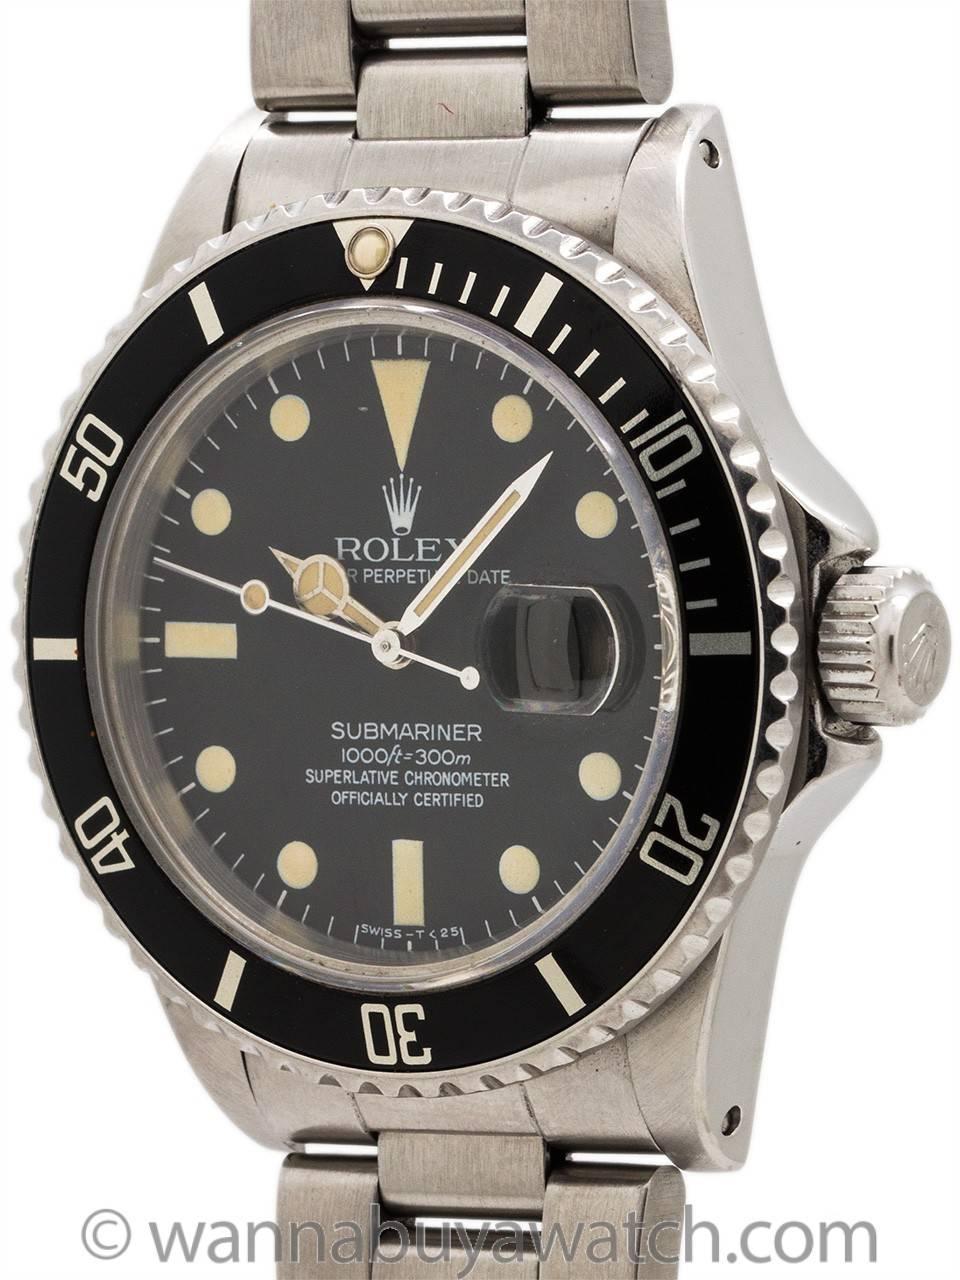 Rolex Submariner ref 16800 Transitional model 8.4 million serial # circa 1984 complete with box and papers. Great looking model with beefy lug case, warmly patina'd luminous indexes and hands, and nicely aged elapsed bezel “pearl.” This is the